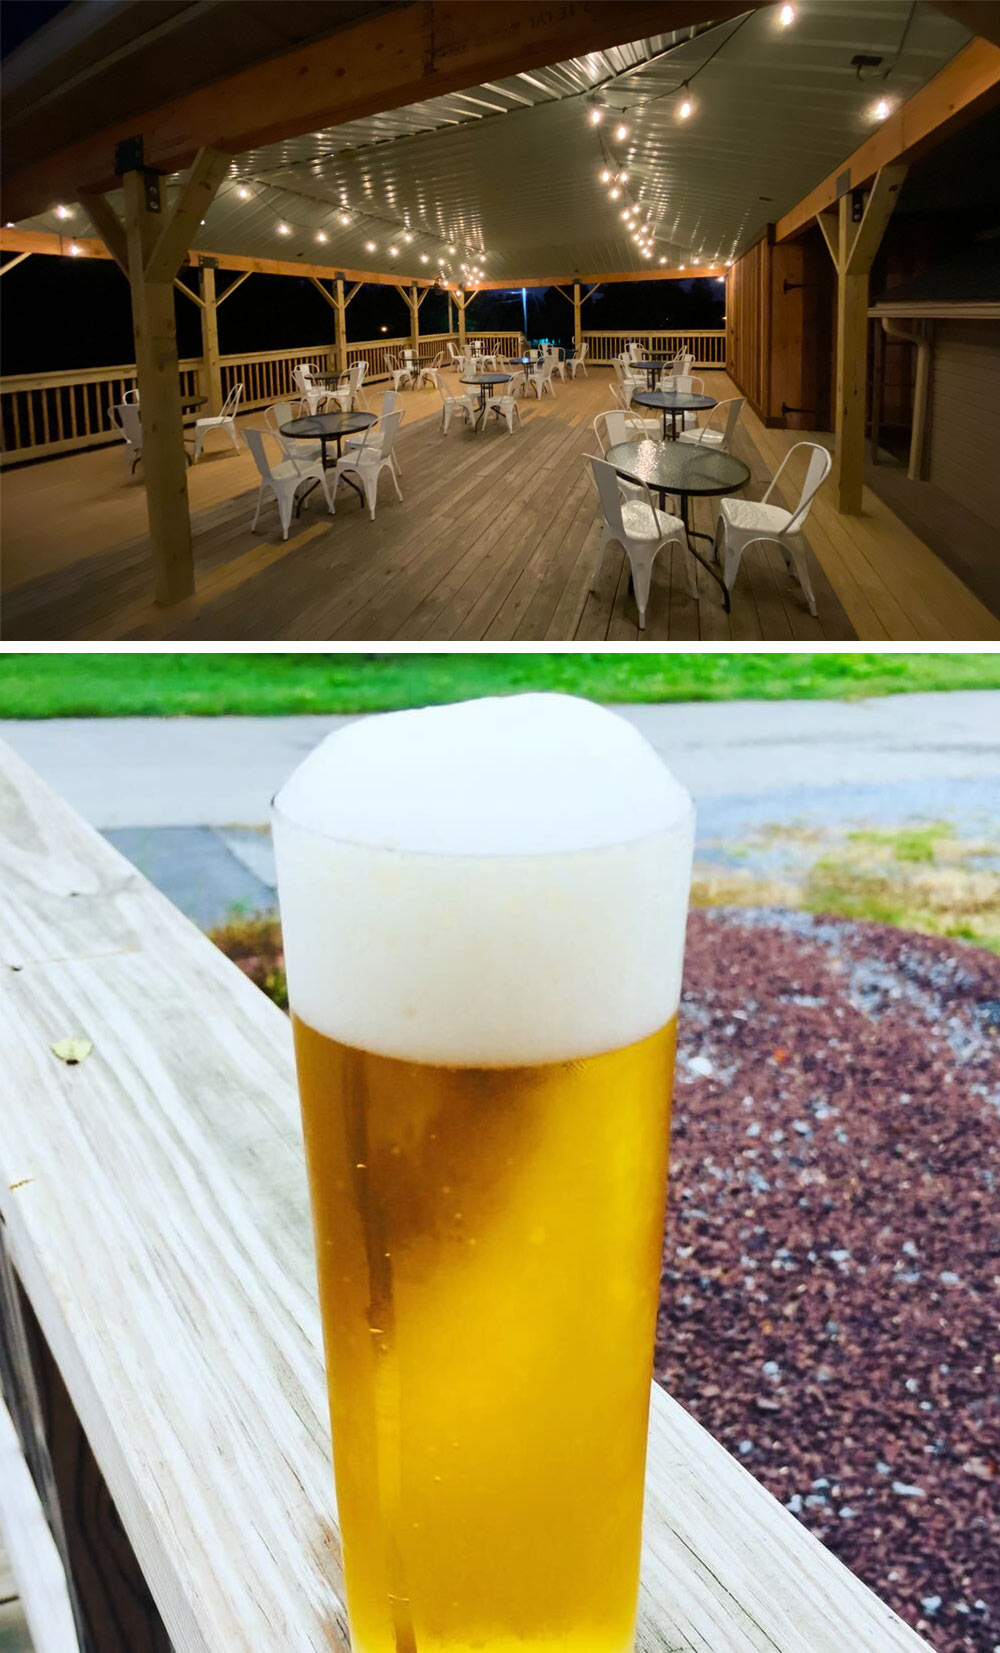 Deck seating and beer